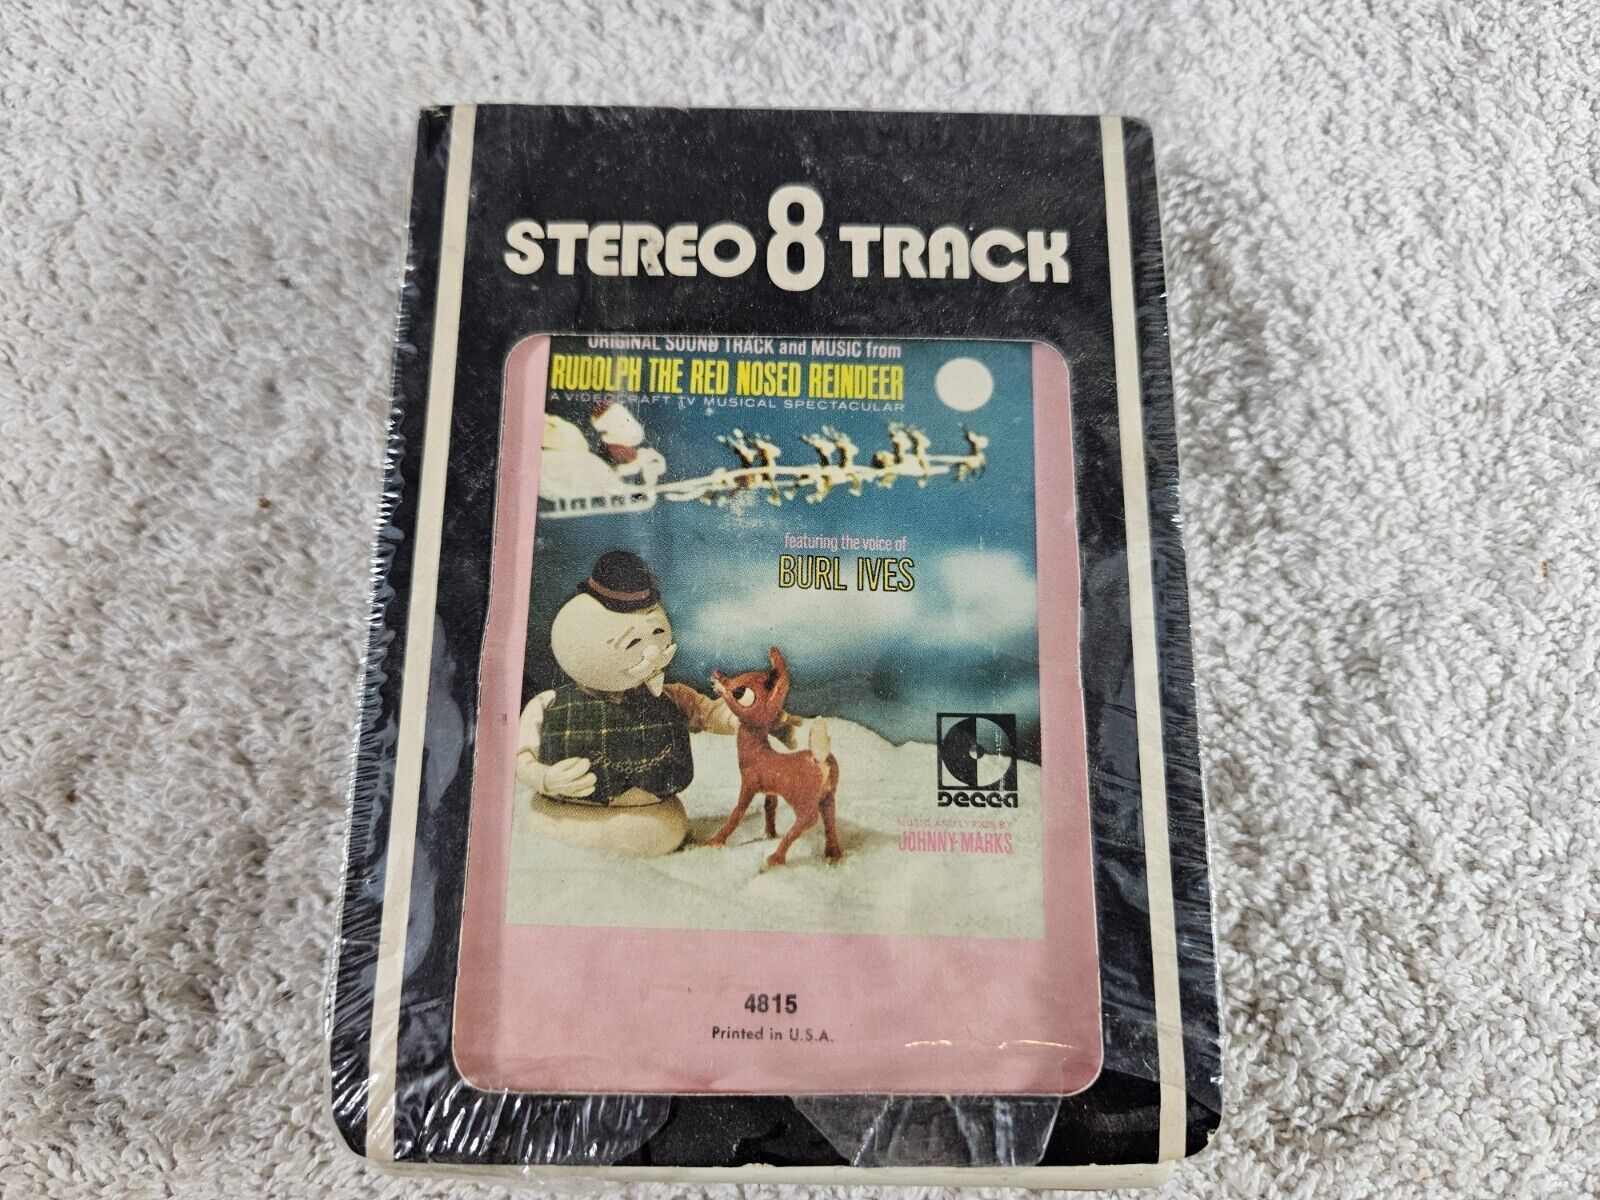 Rudolph The Red Nosed Reindeer- Original Soundtrack 8-Track Tape. Please read